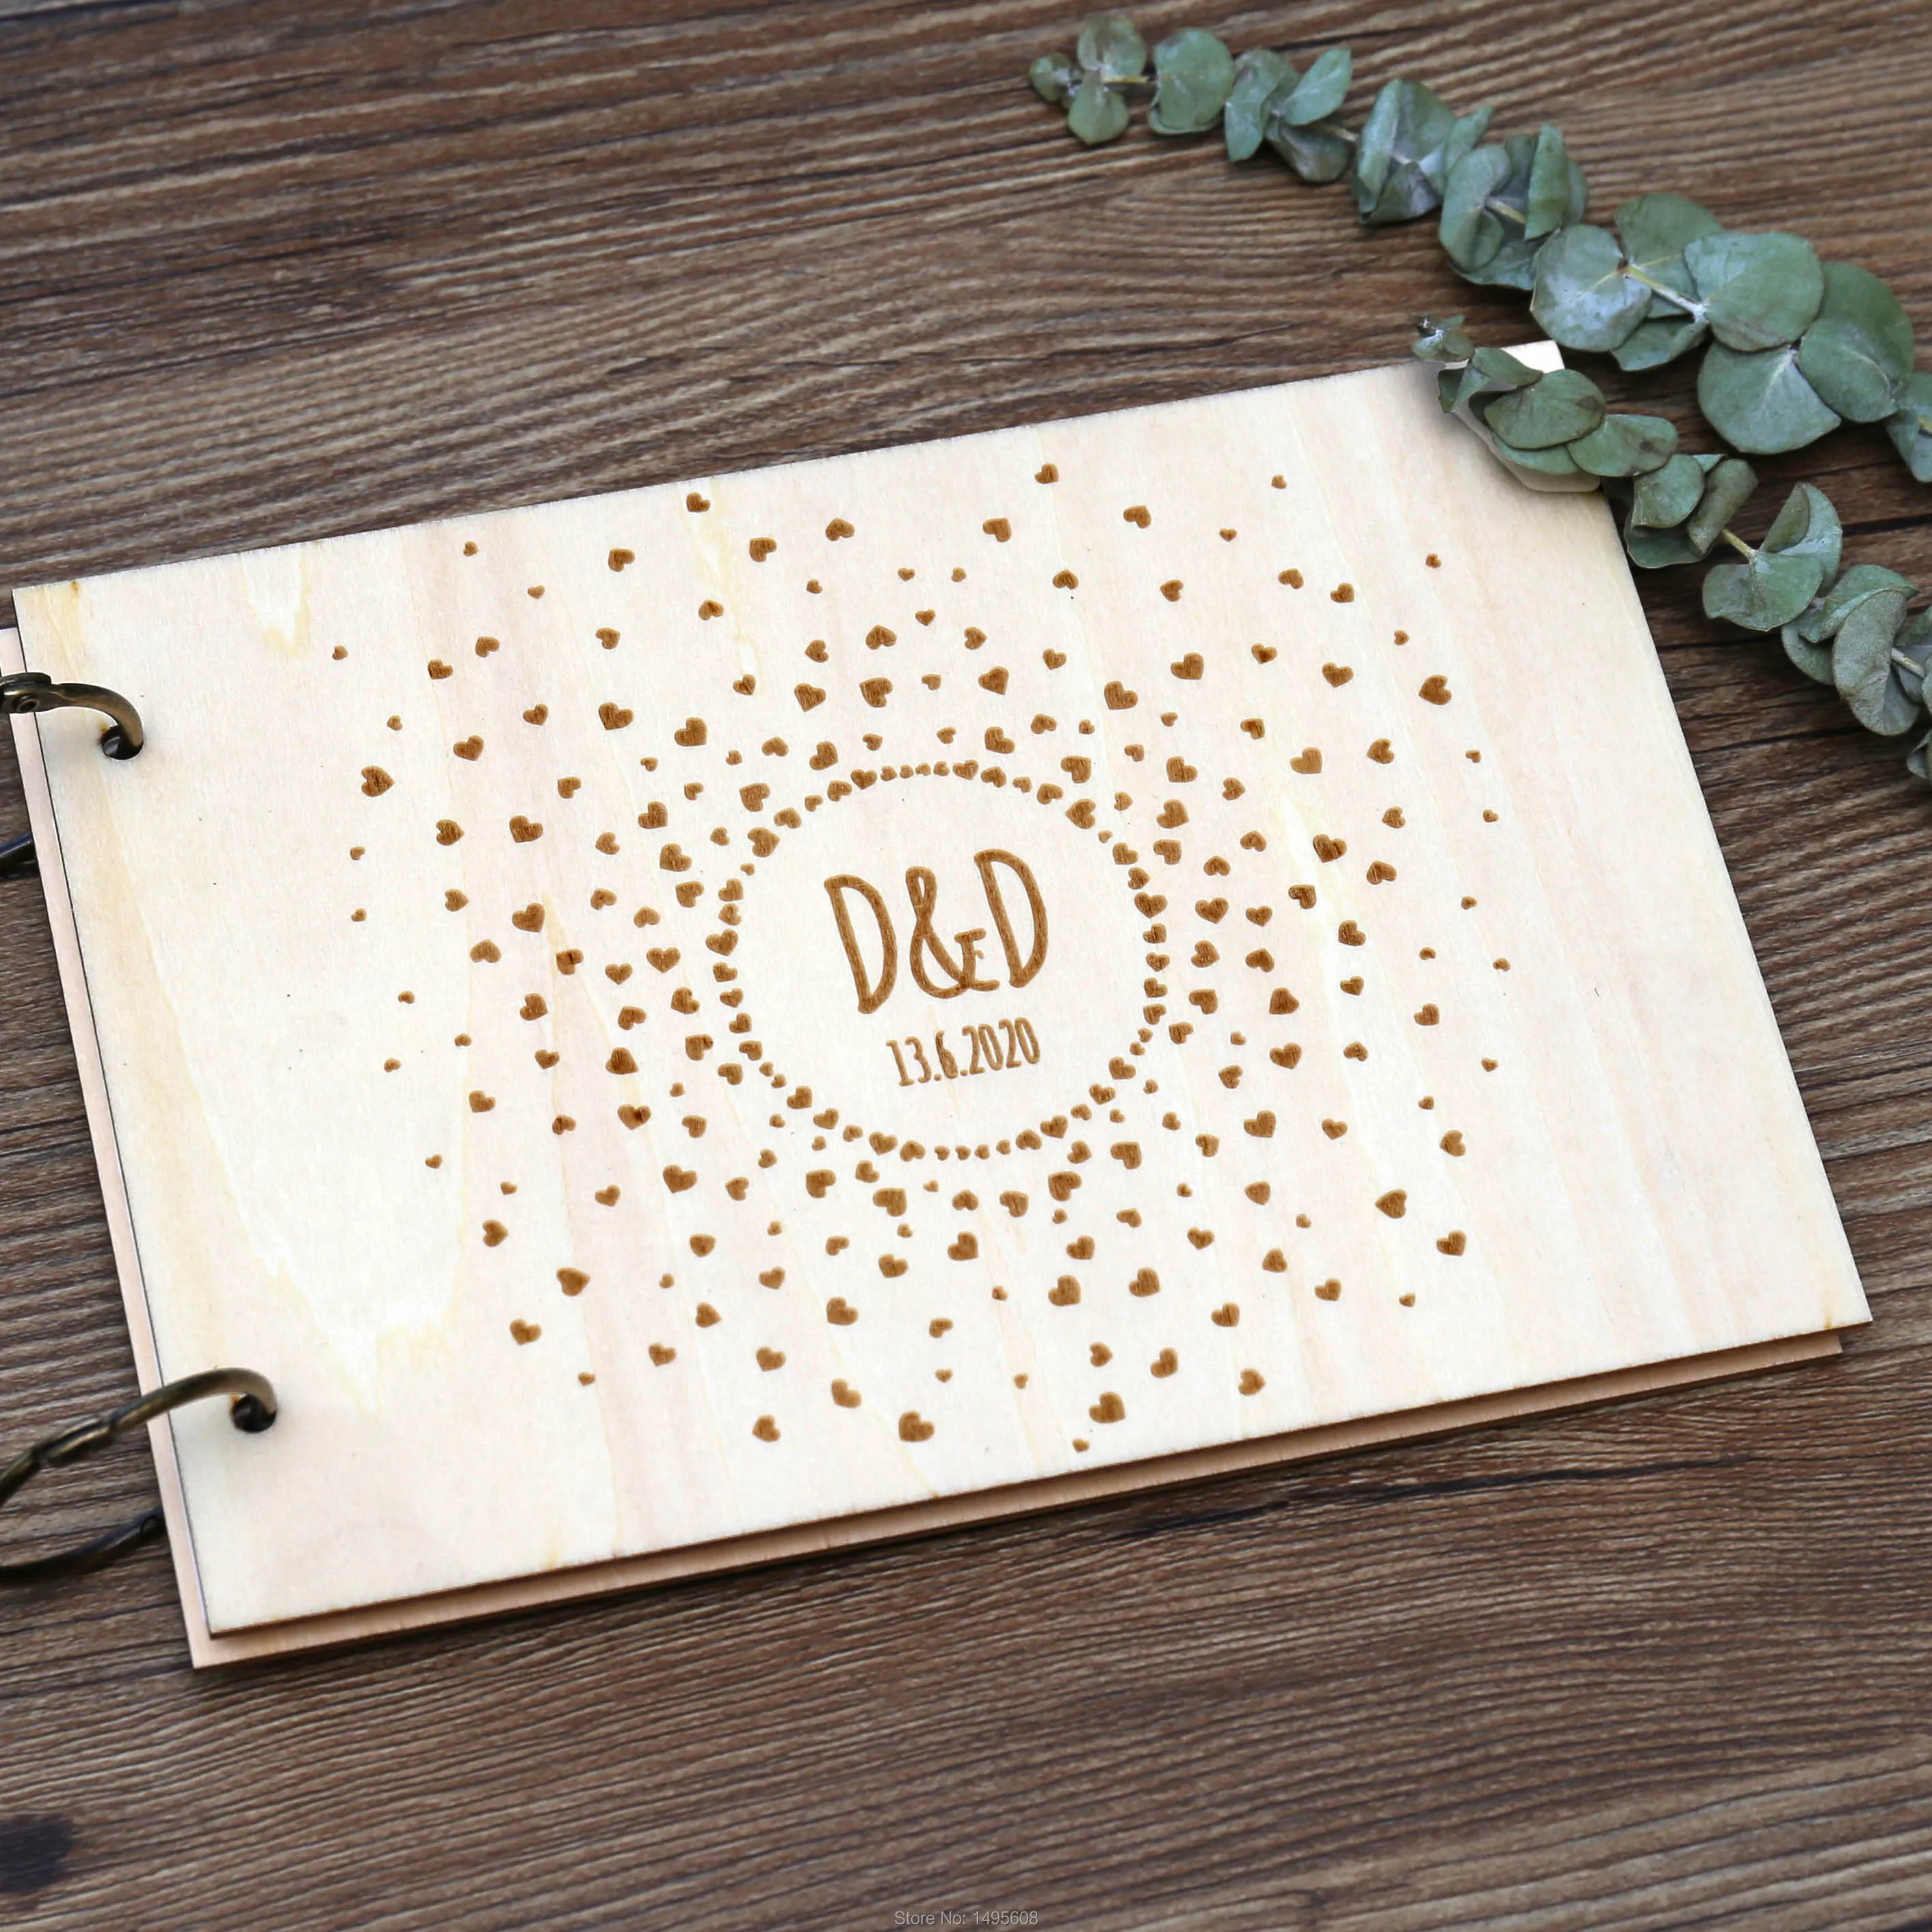 Personalized GuestBook , Rustic garden wedding photo album, wedding gifts , Engraved Wooden Guest Book,initial wedding decor